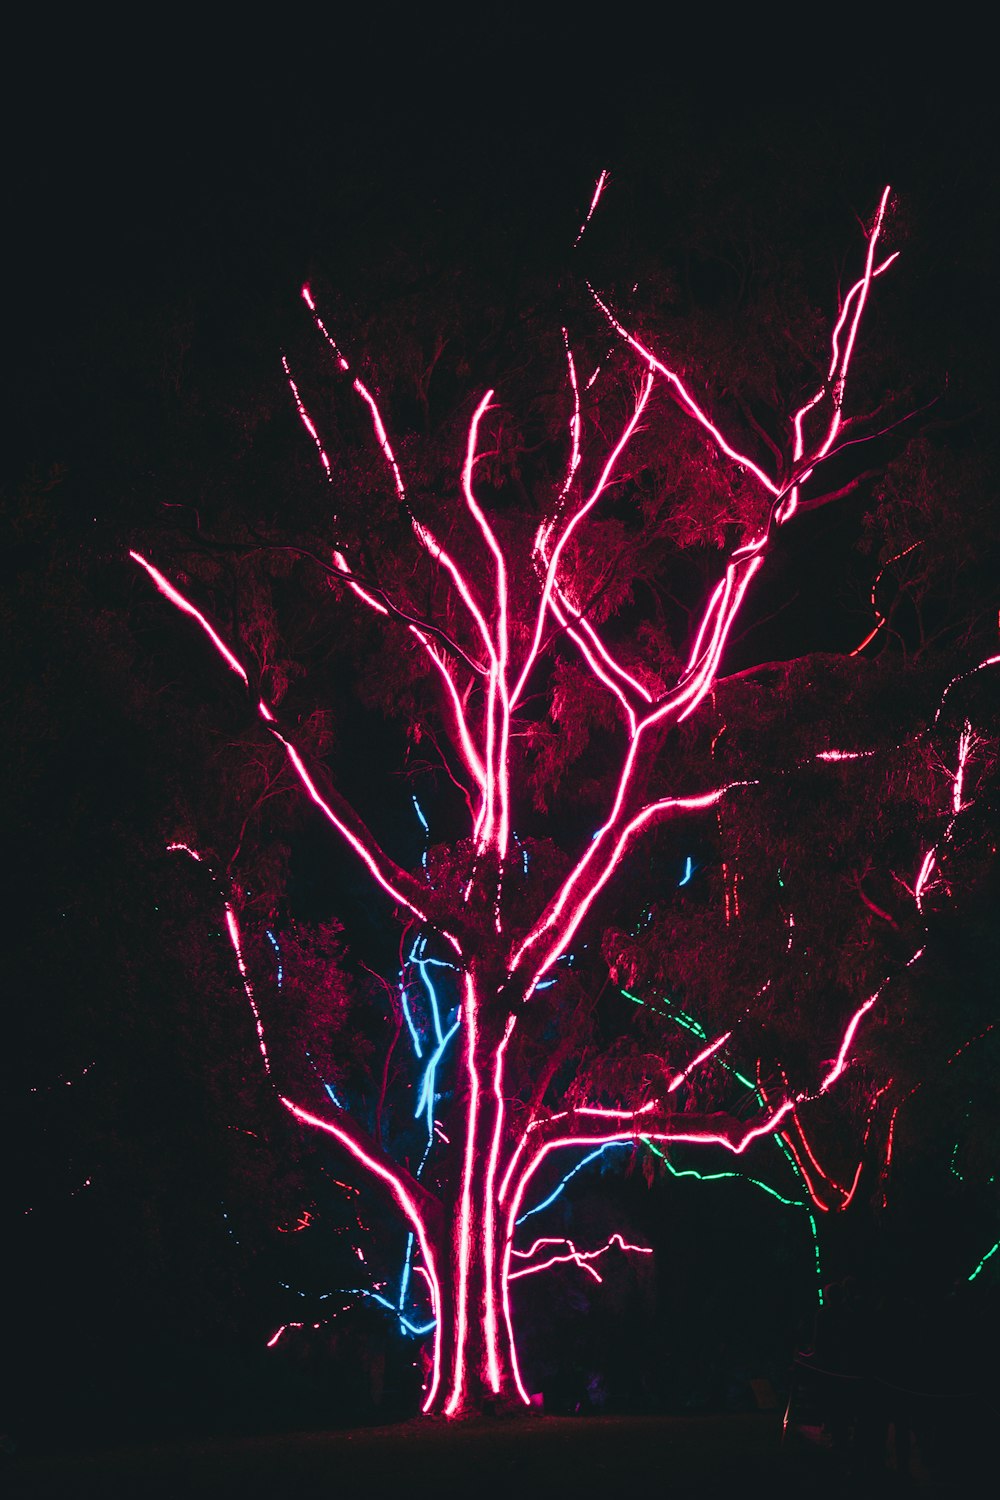 a lit up tree in the dark at night